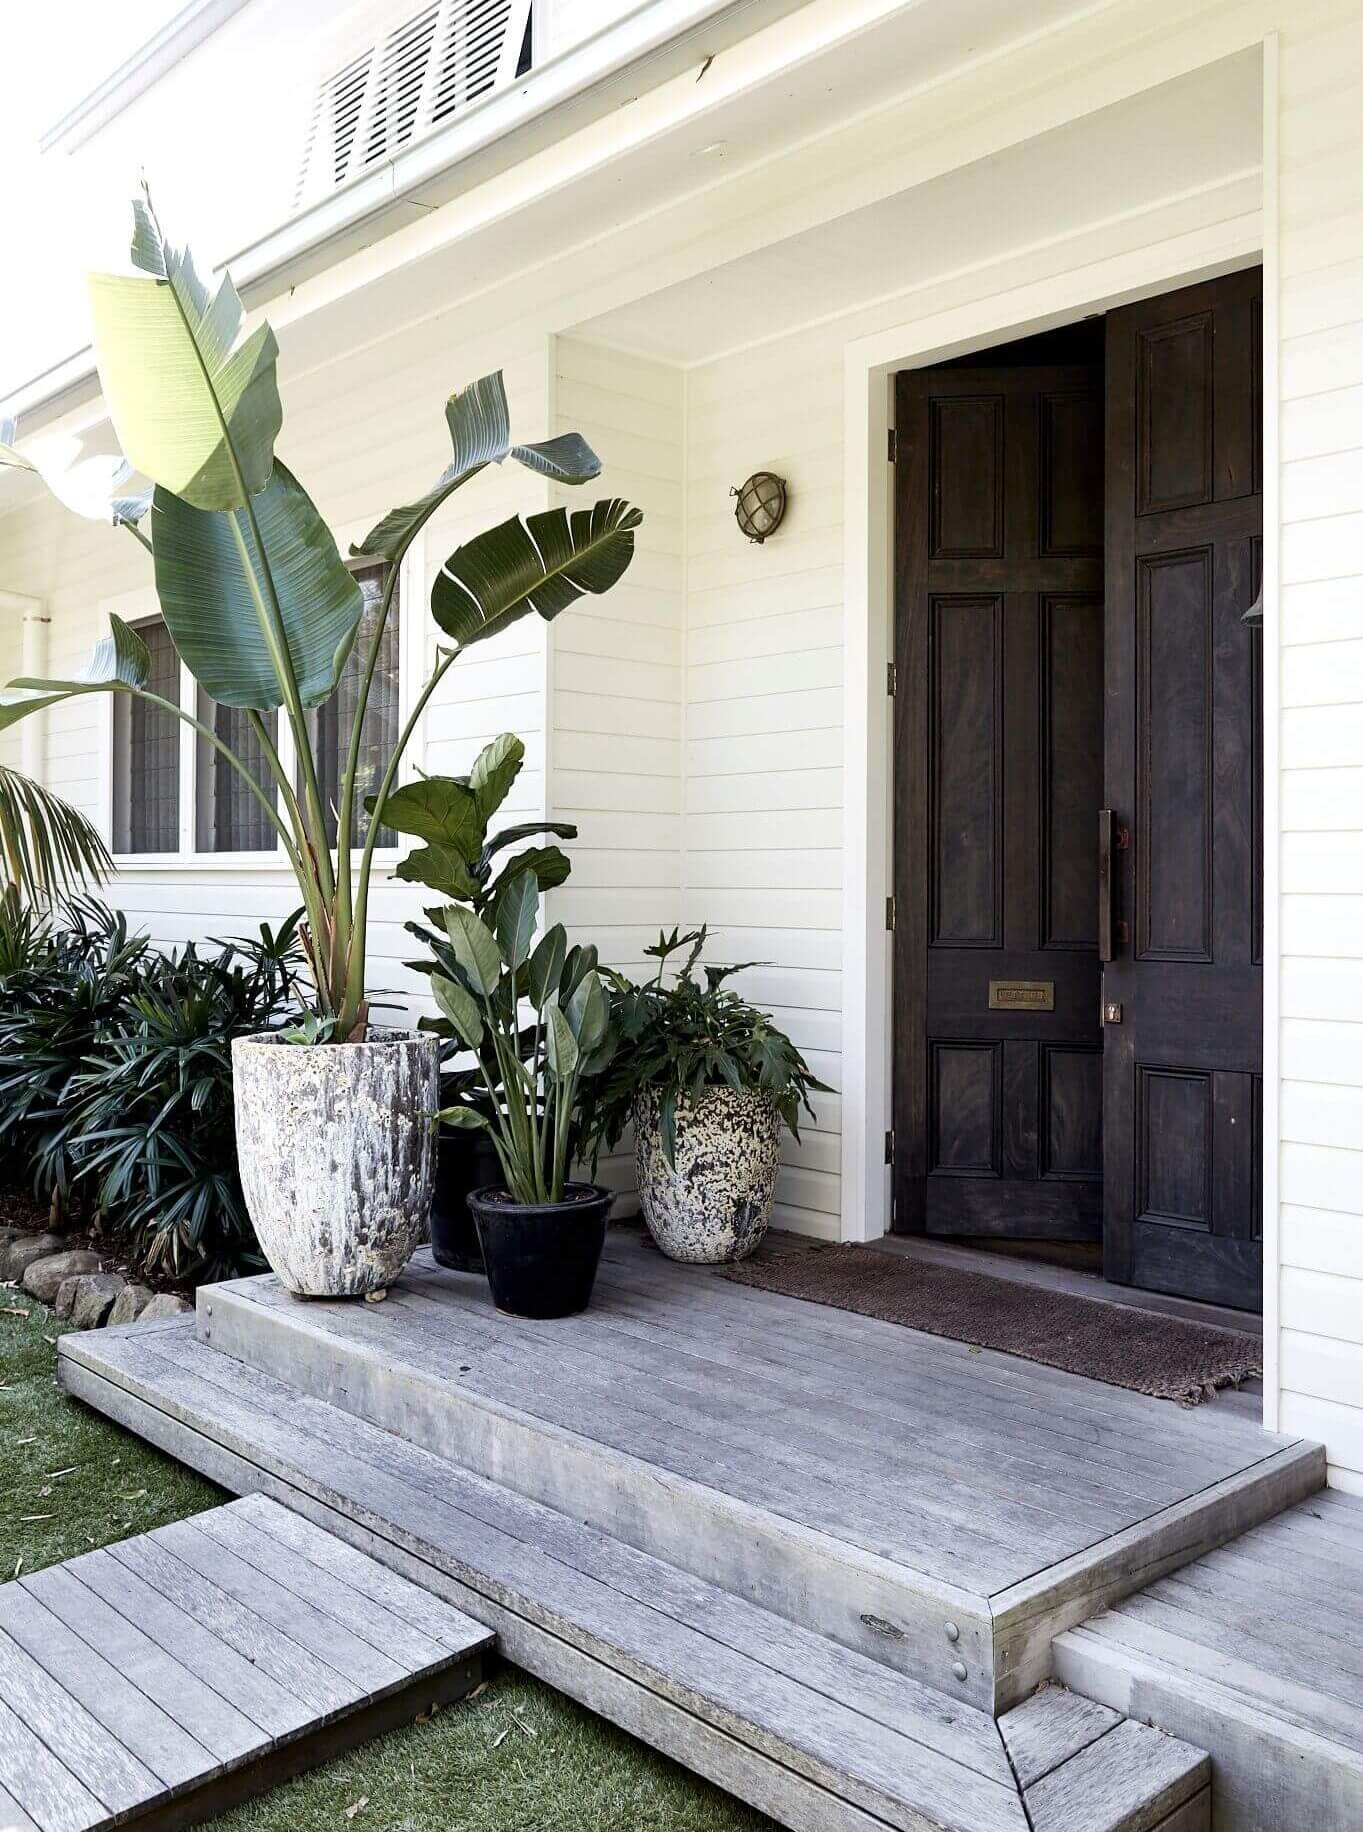 Entry to Magnolia House, Byron Beach Abodes with grey timber decking, large feature plants and recycled timber doors salvaged from the QVB in Sydney